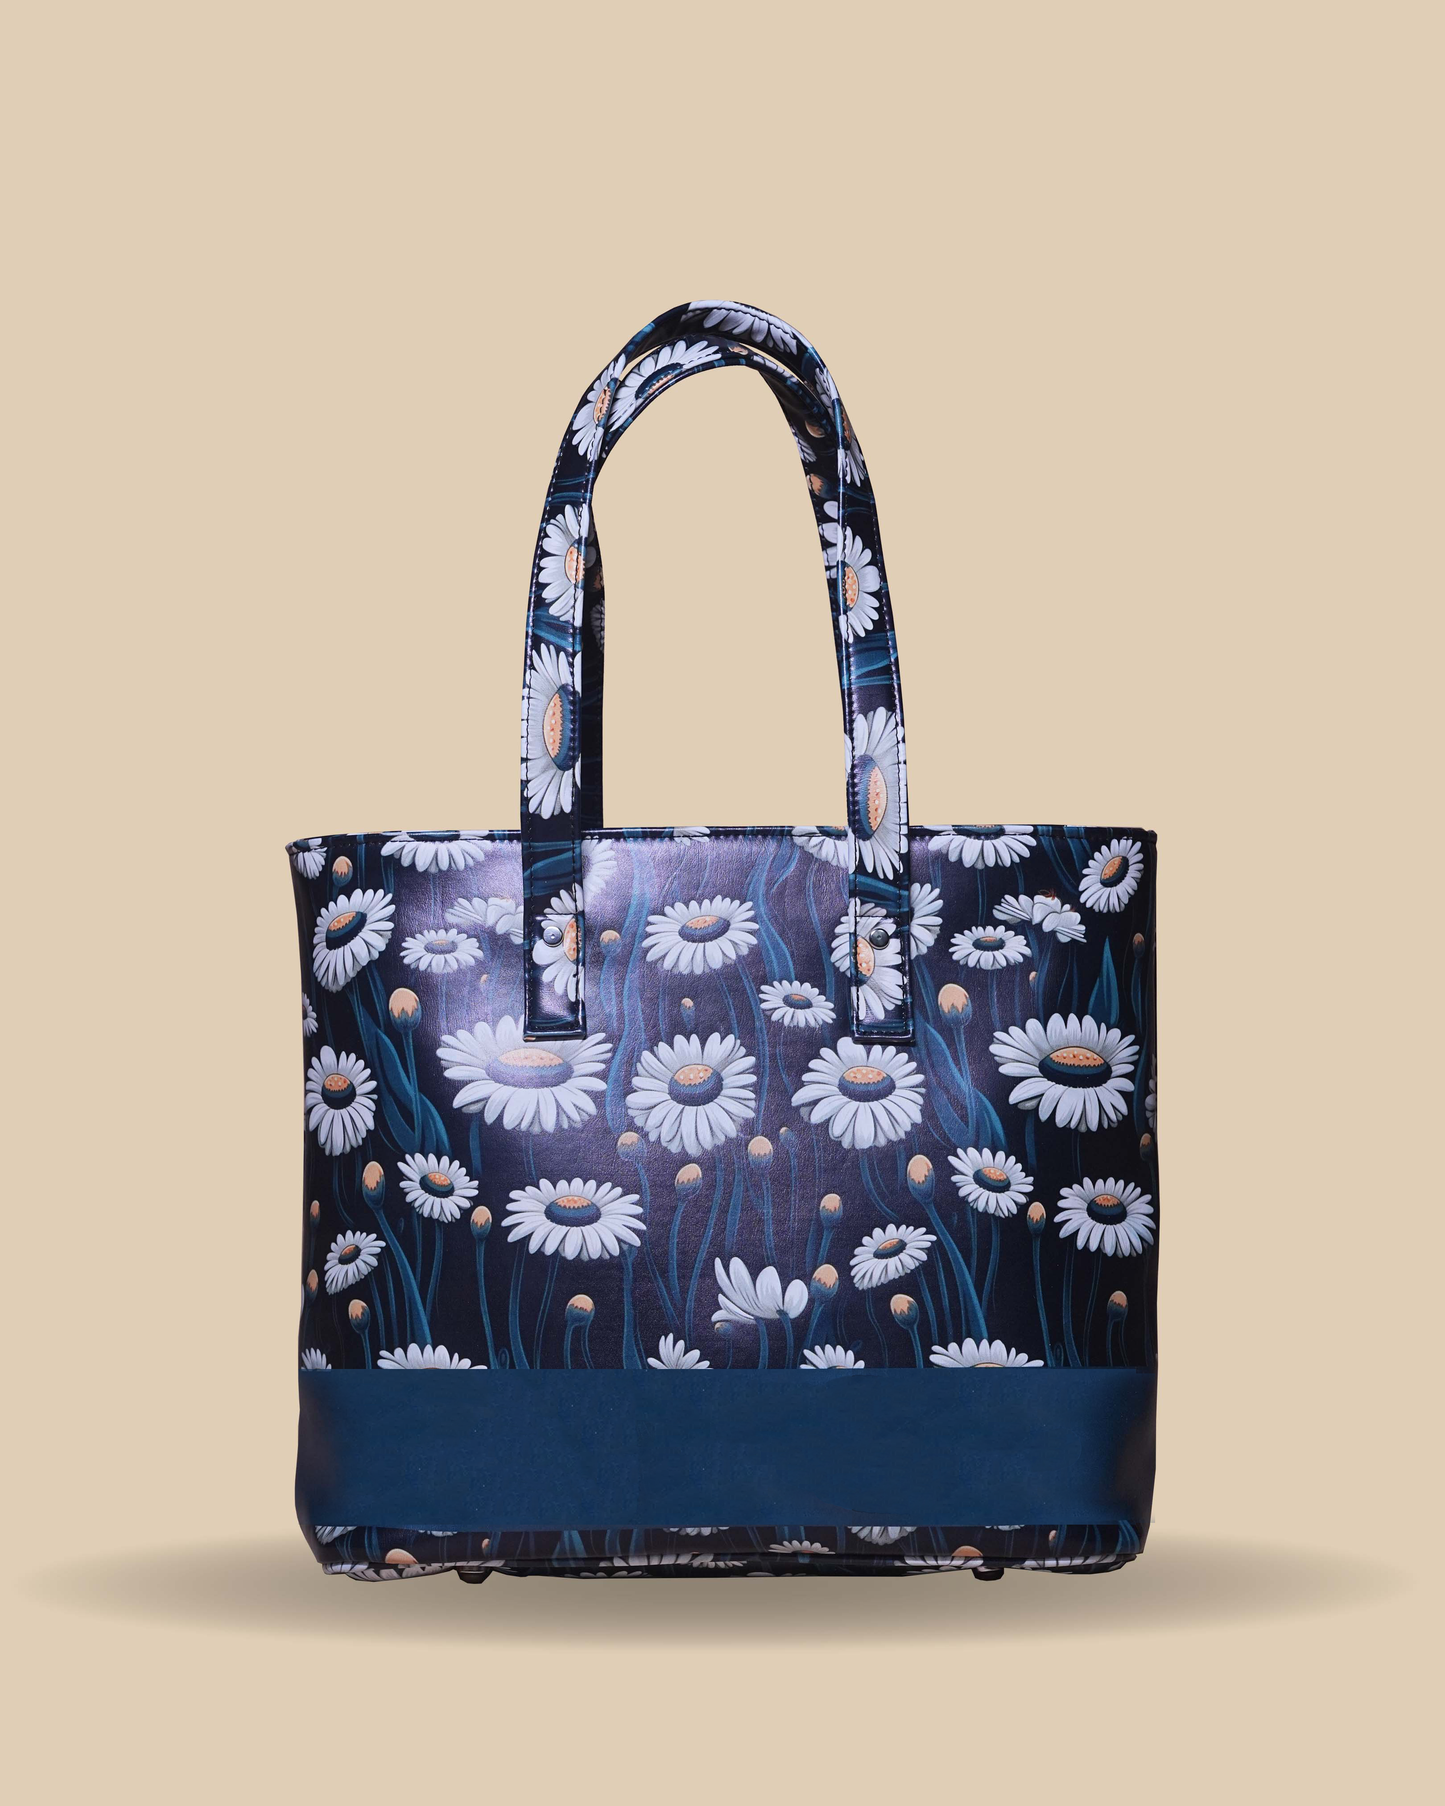 Customized Shoulder Tote Bag with Beautiful Floral design